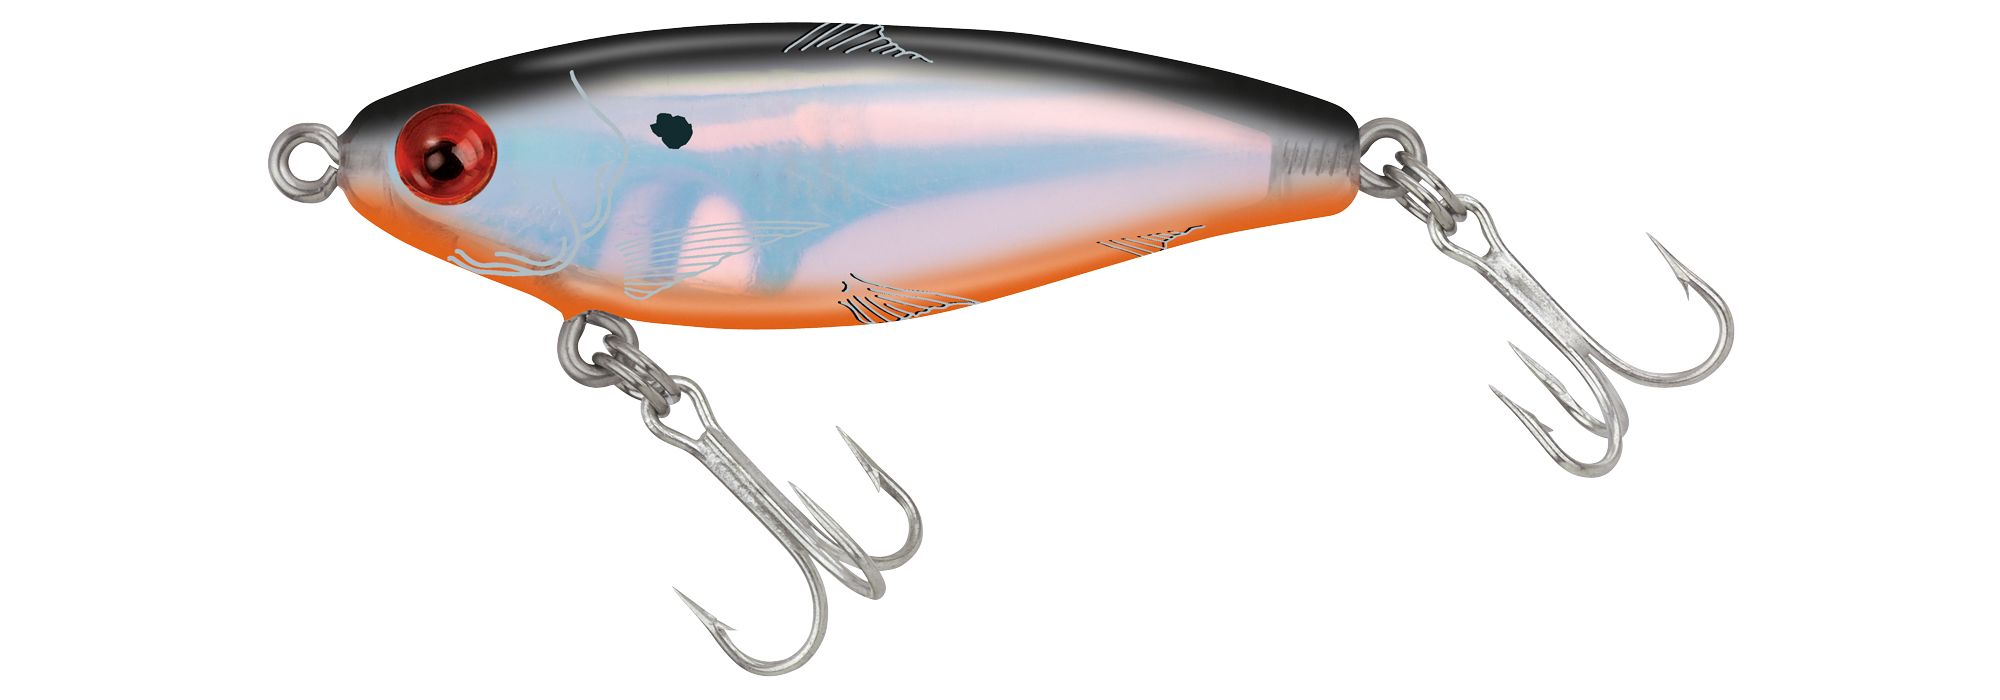 Heavy Dine 18MR Sinking Twitchbait - Eastern Outfitters